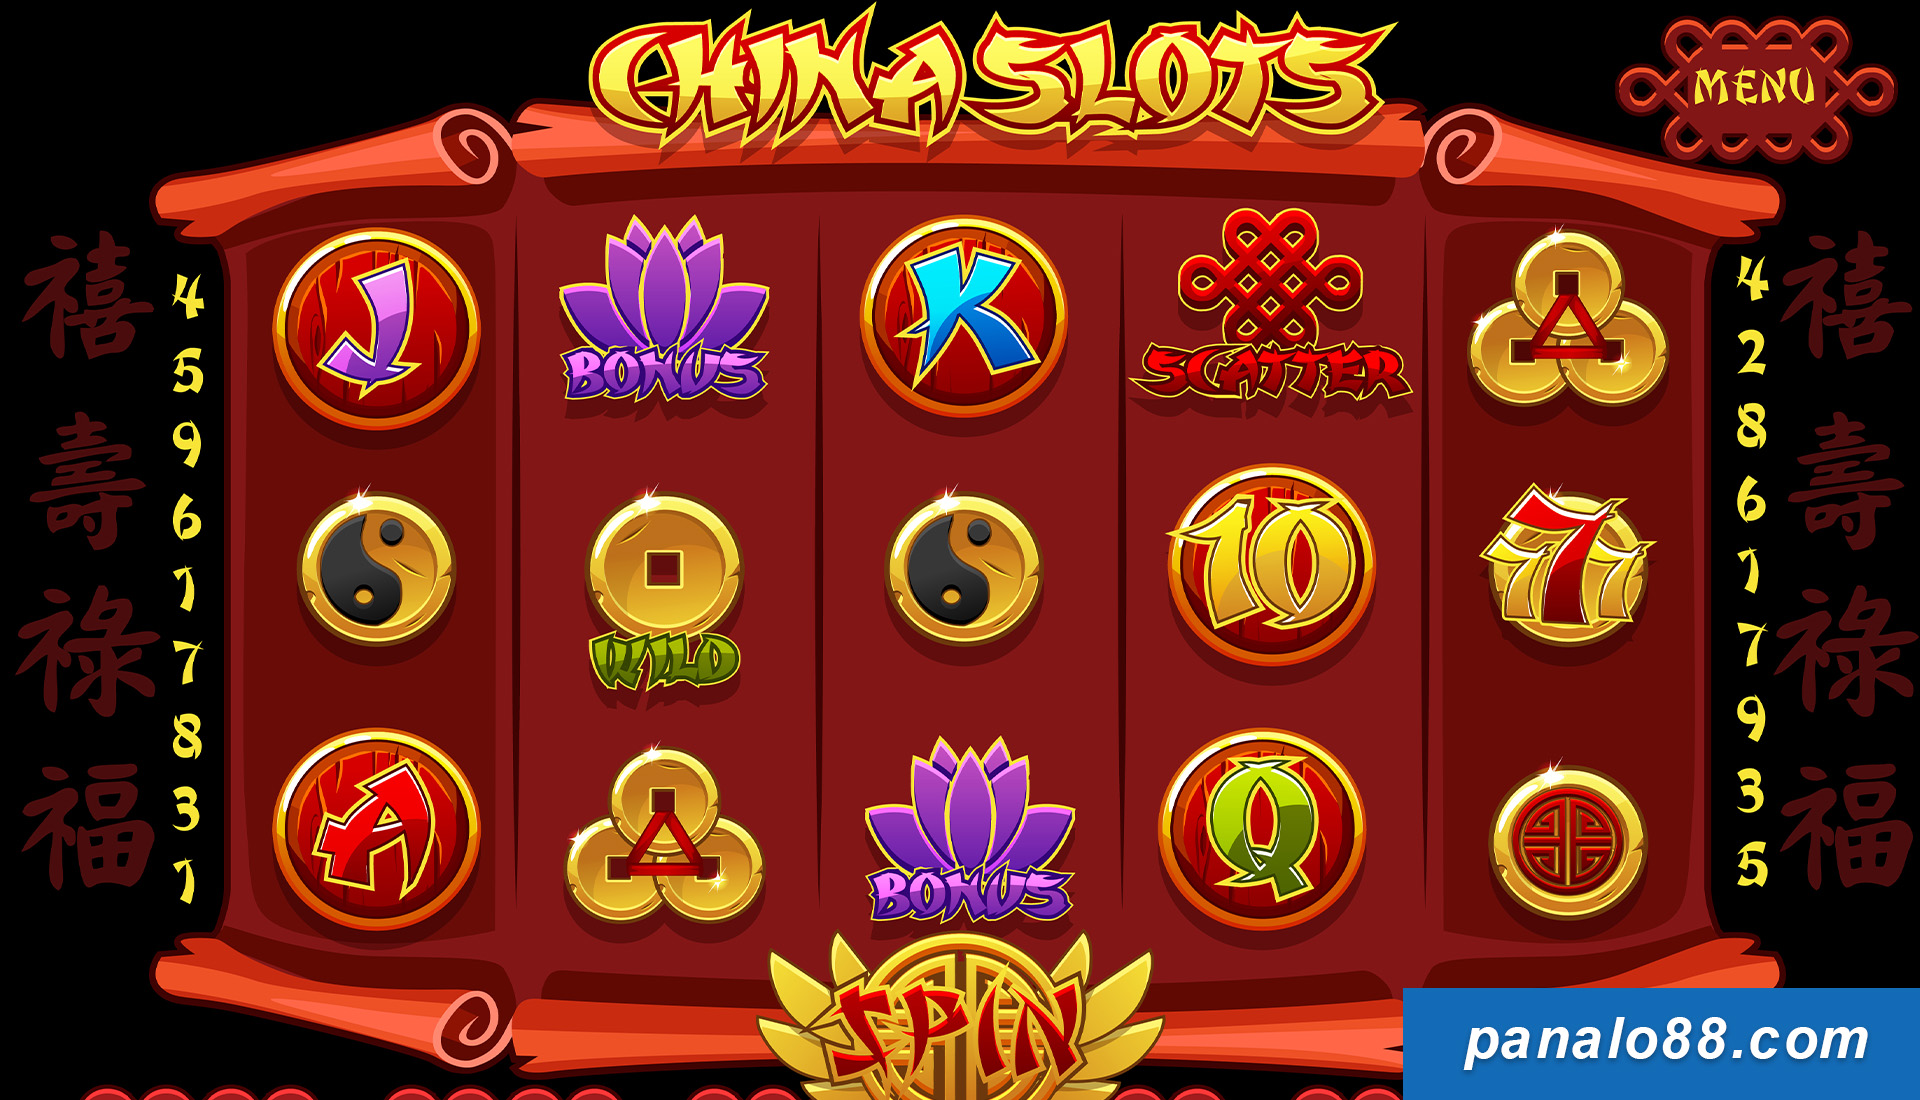 Top 5 slot game themes most popular among Filipino players. - The most ...